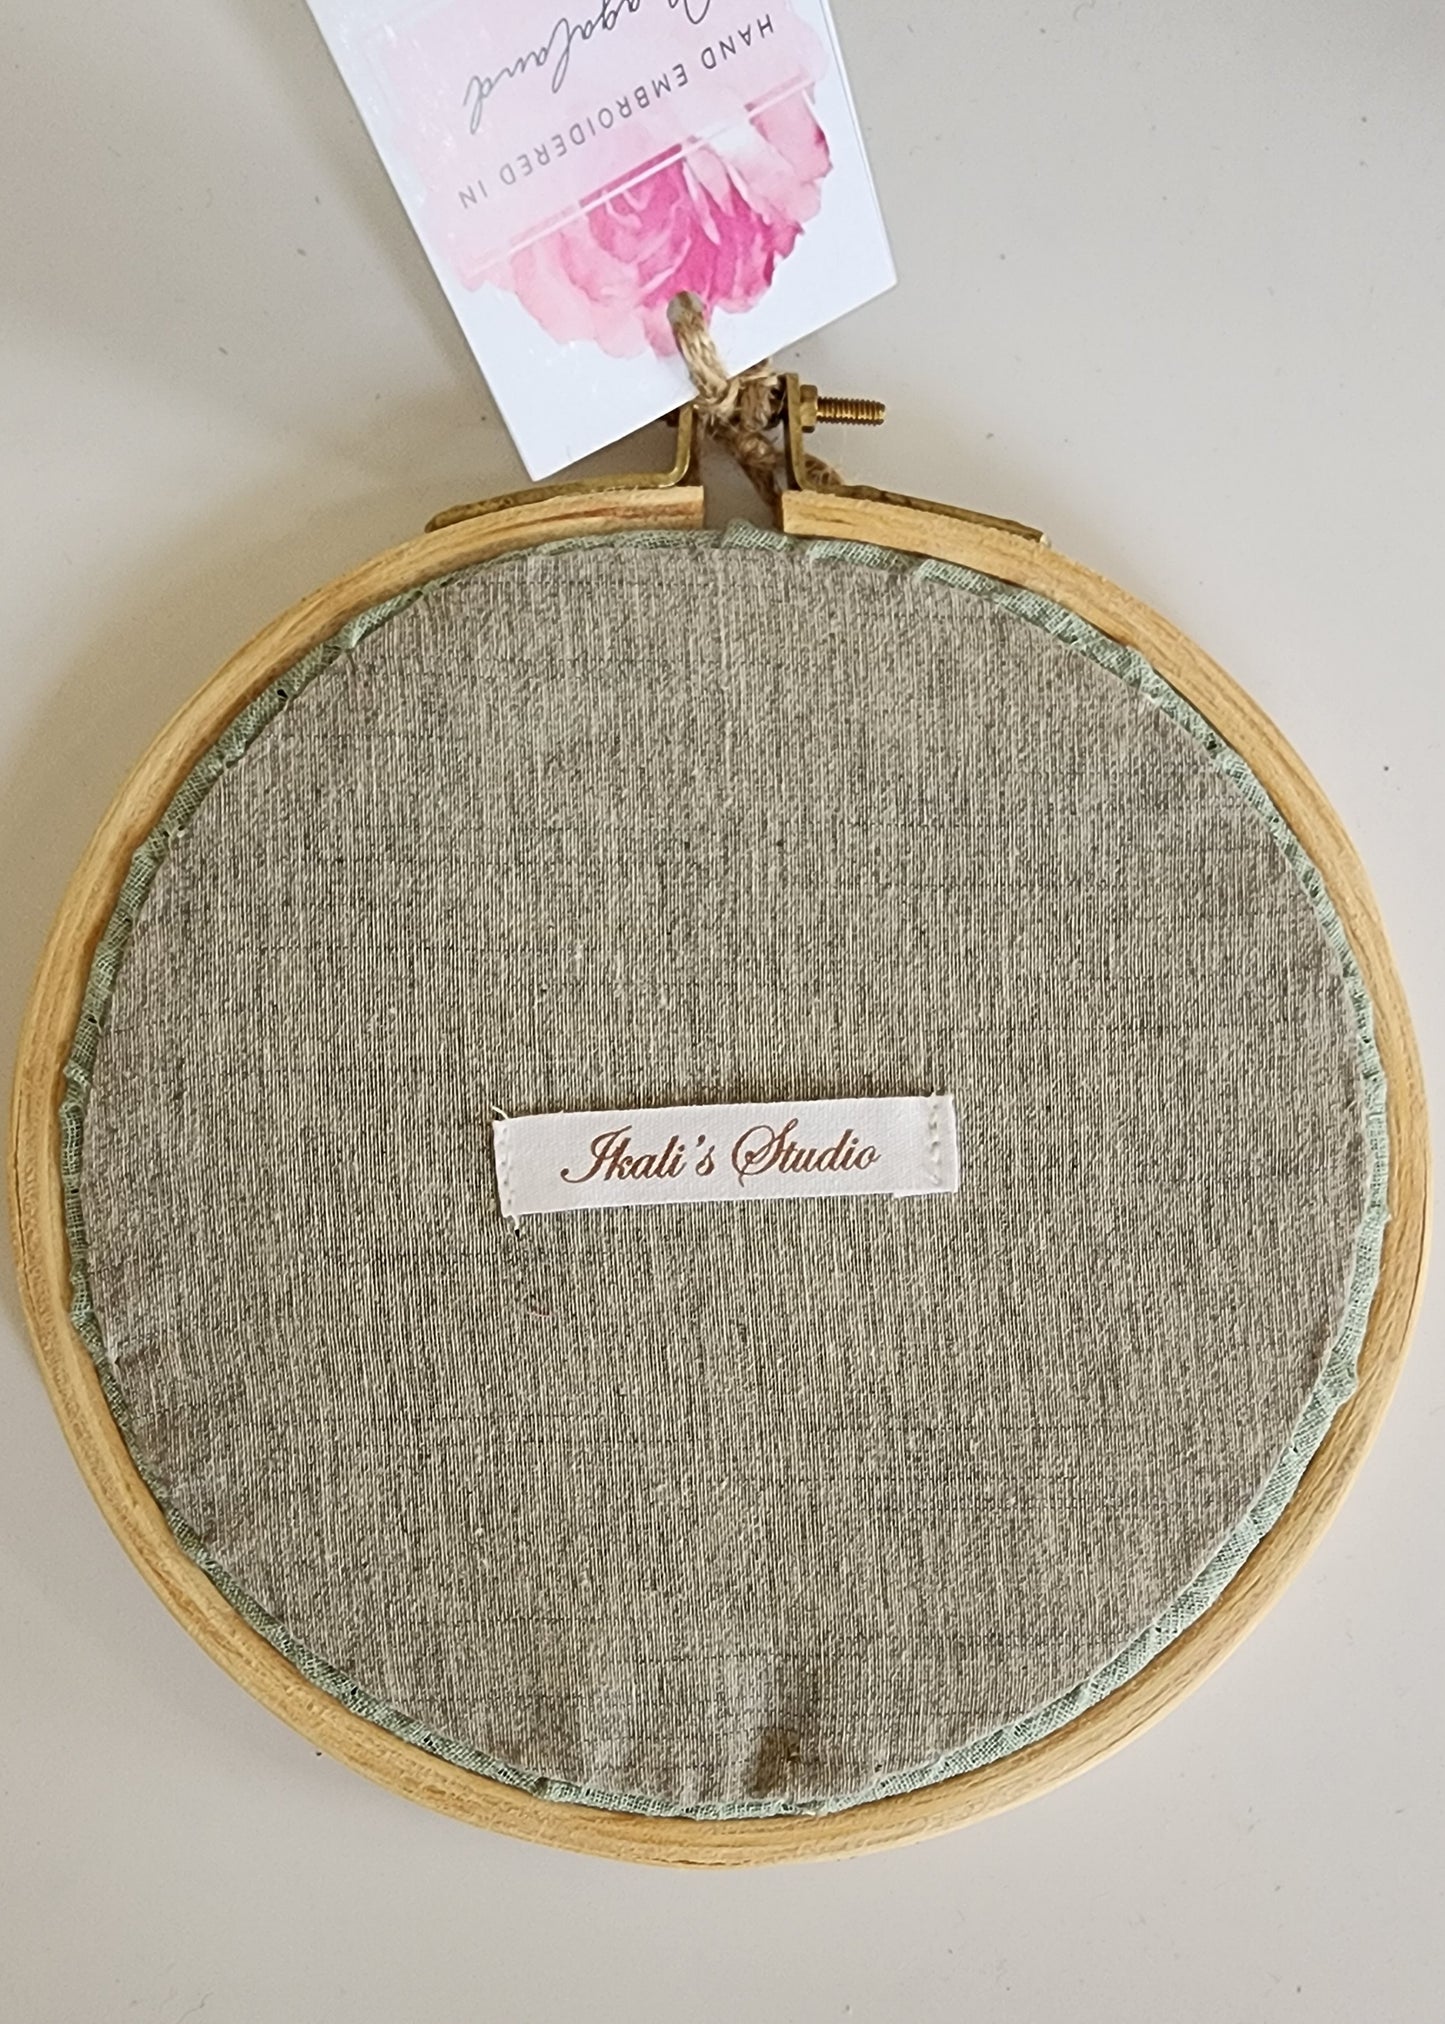 Ikali - Faith Grace Love - Hand-embroidered Wall-hanging Hoop